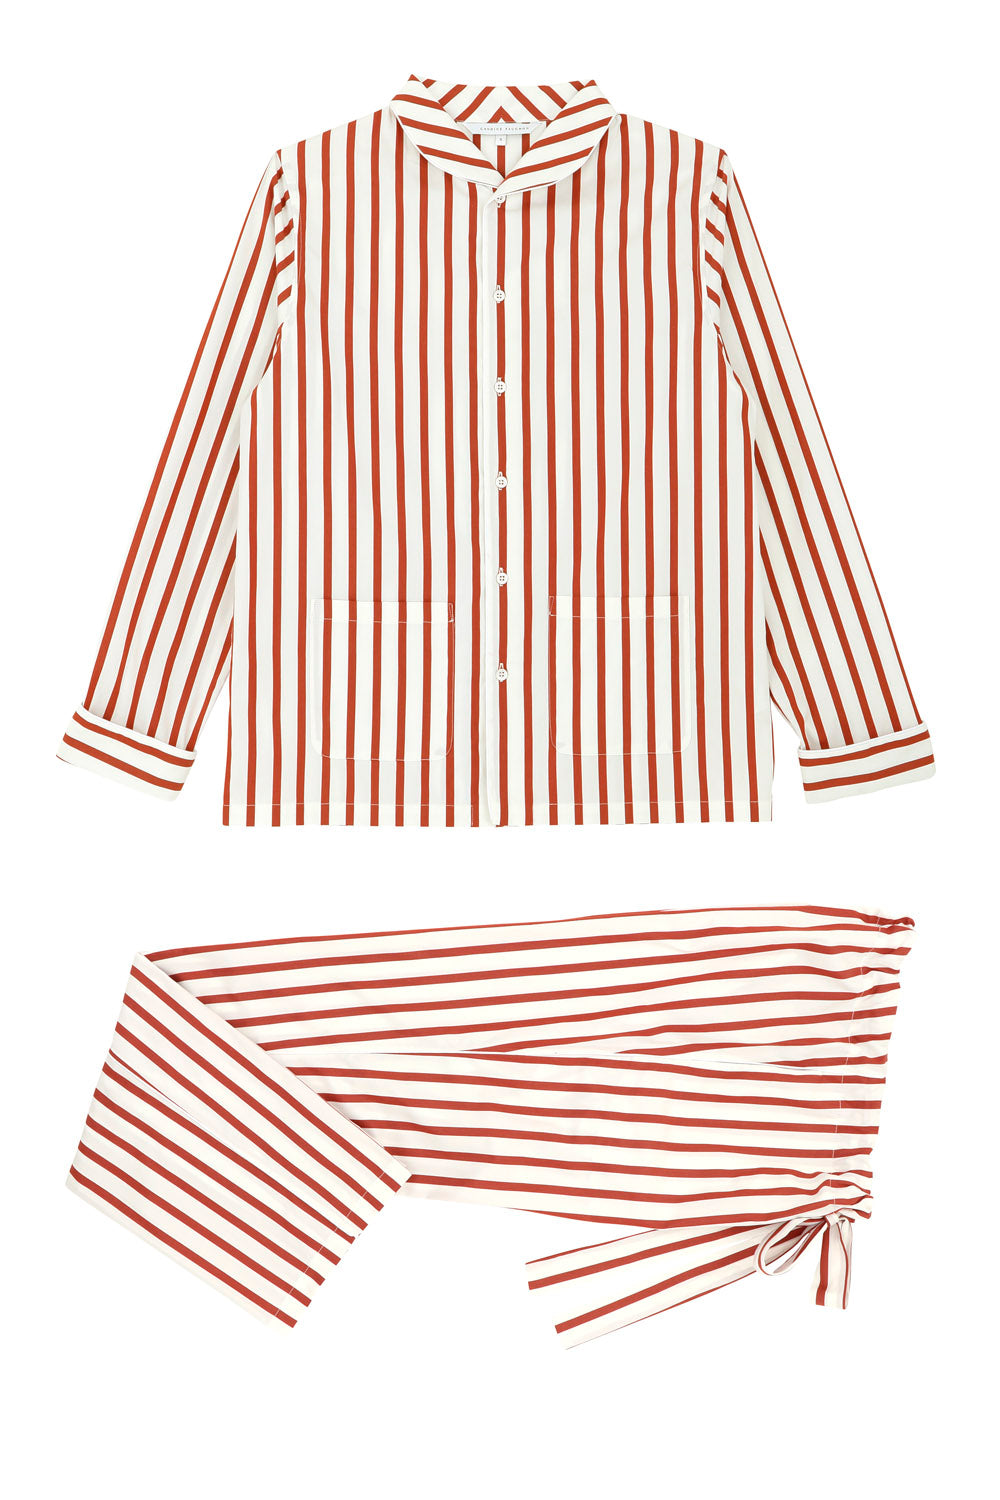 The Waldorf in striped terracotta cotton broadcloth 